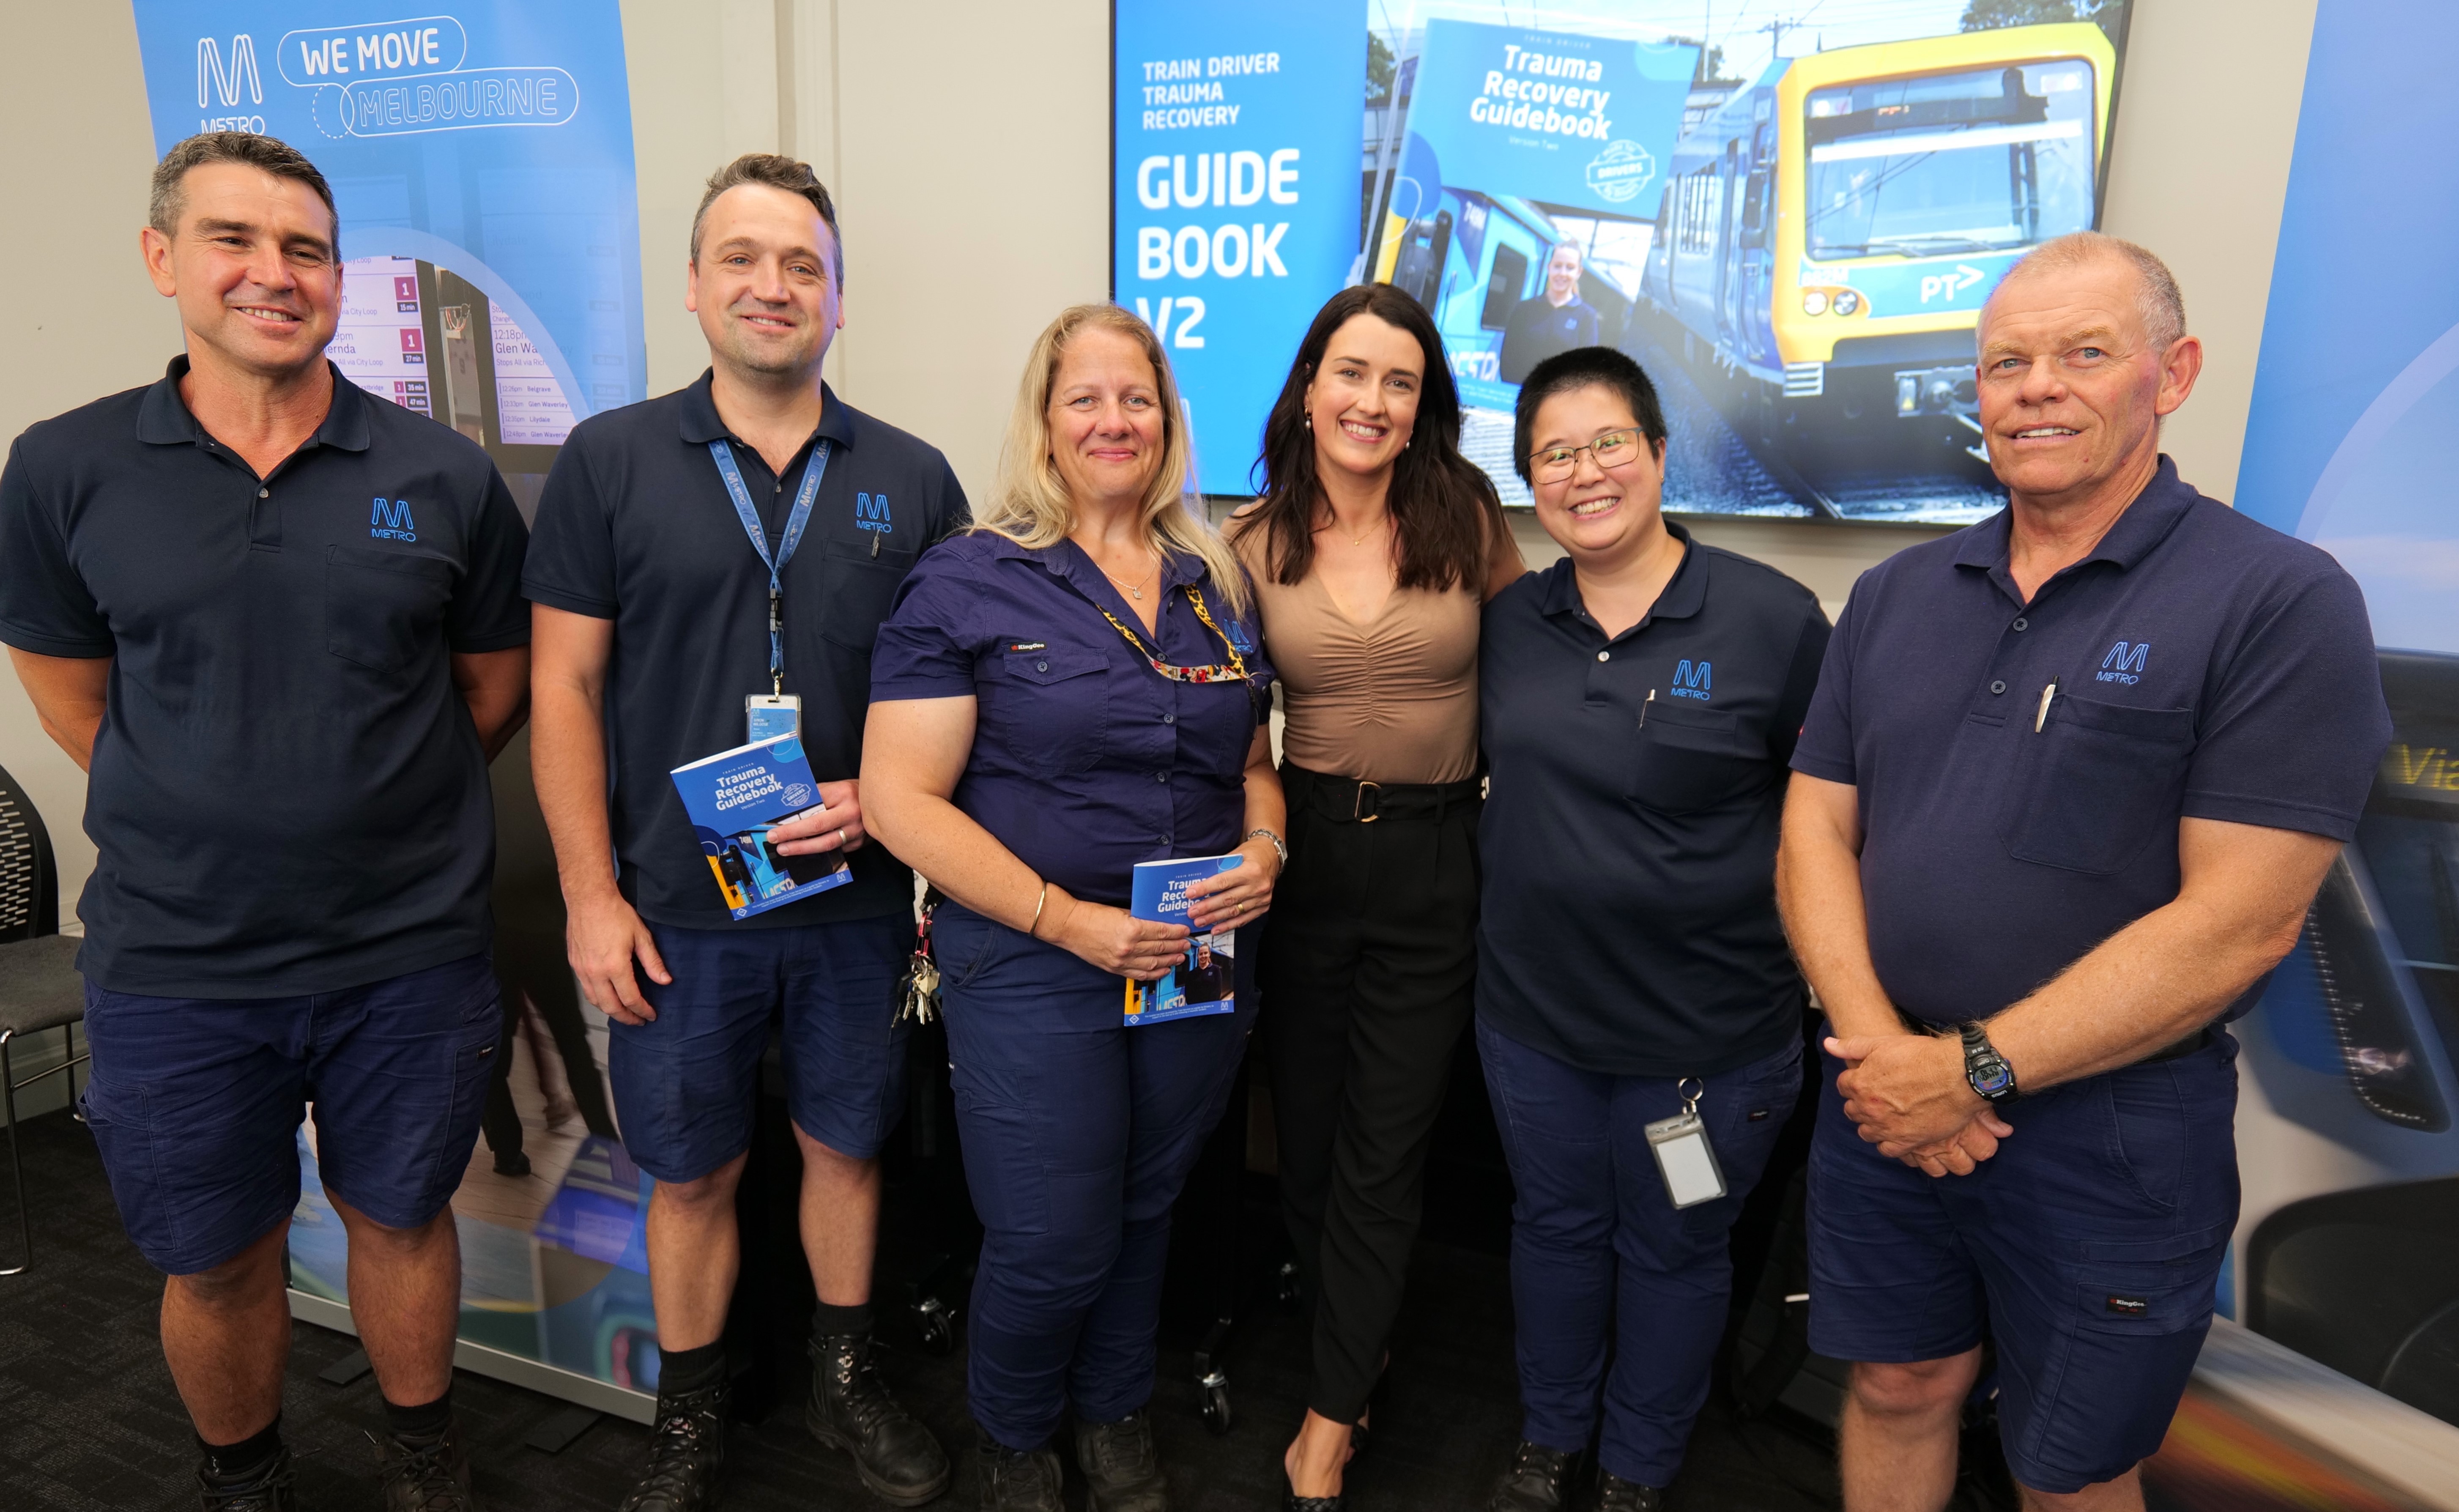 At the launch of the Train Services Trauma Recovery Guidebook Version 2: Paul Schweitzer (On Job Trainer), Simon Wilgose (On Job Trainer), Tamara Aquilina (Train Driver), Brittany Fisher (Depot Train Driver Manager), Jenny Kwong (On Job Trainer), Ian Web (Training Officer).